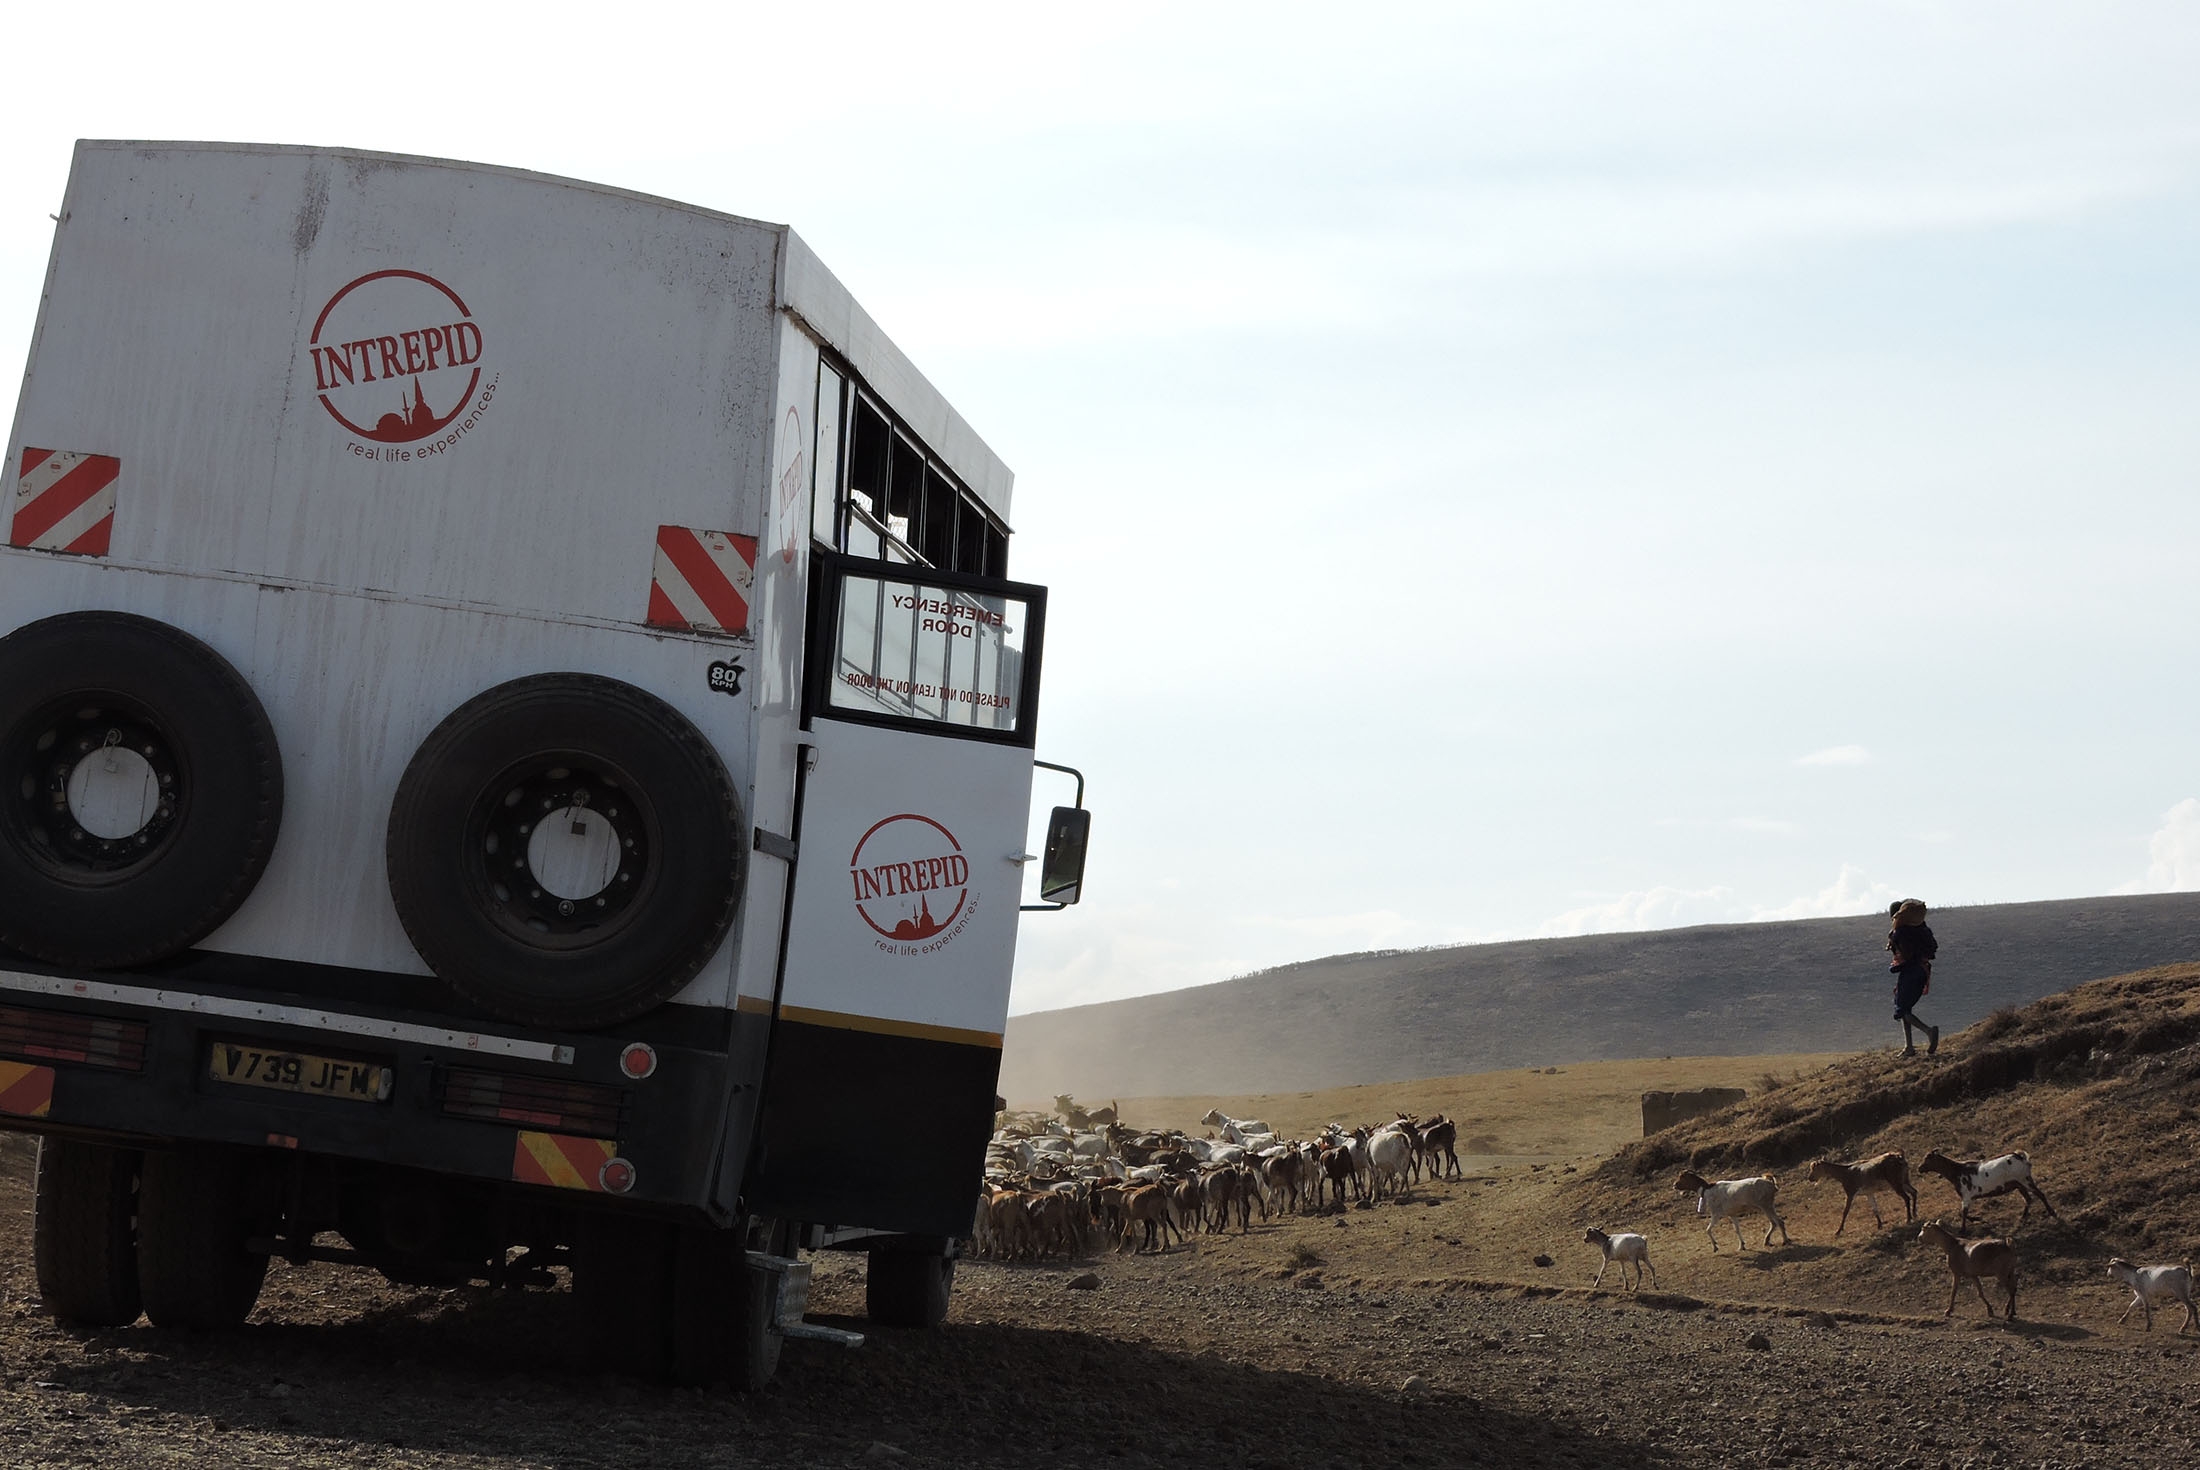 Travelling with Intrepid through Tanzania in an overland vehicle